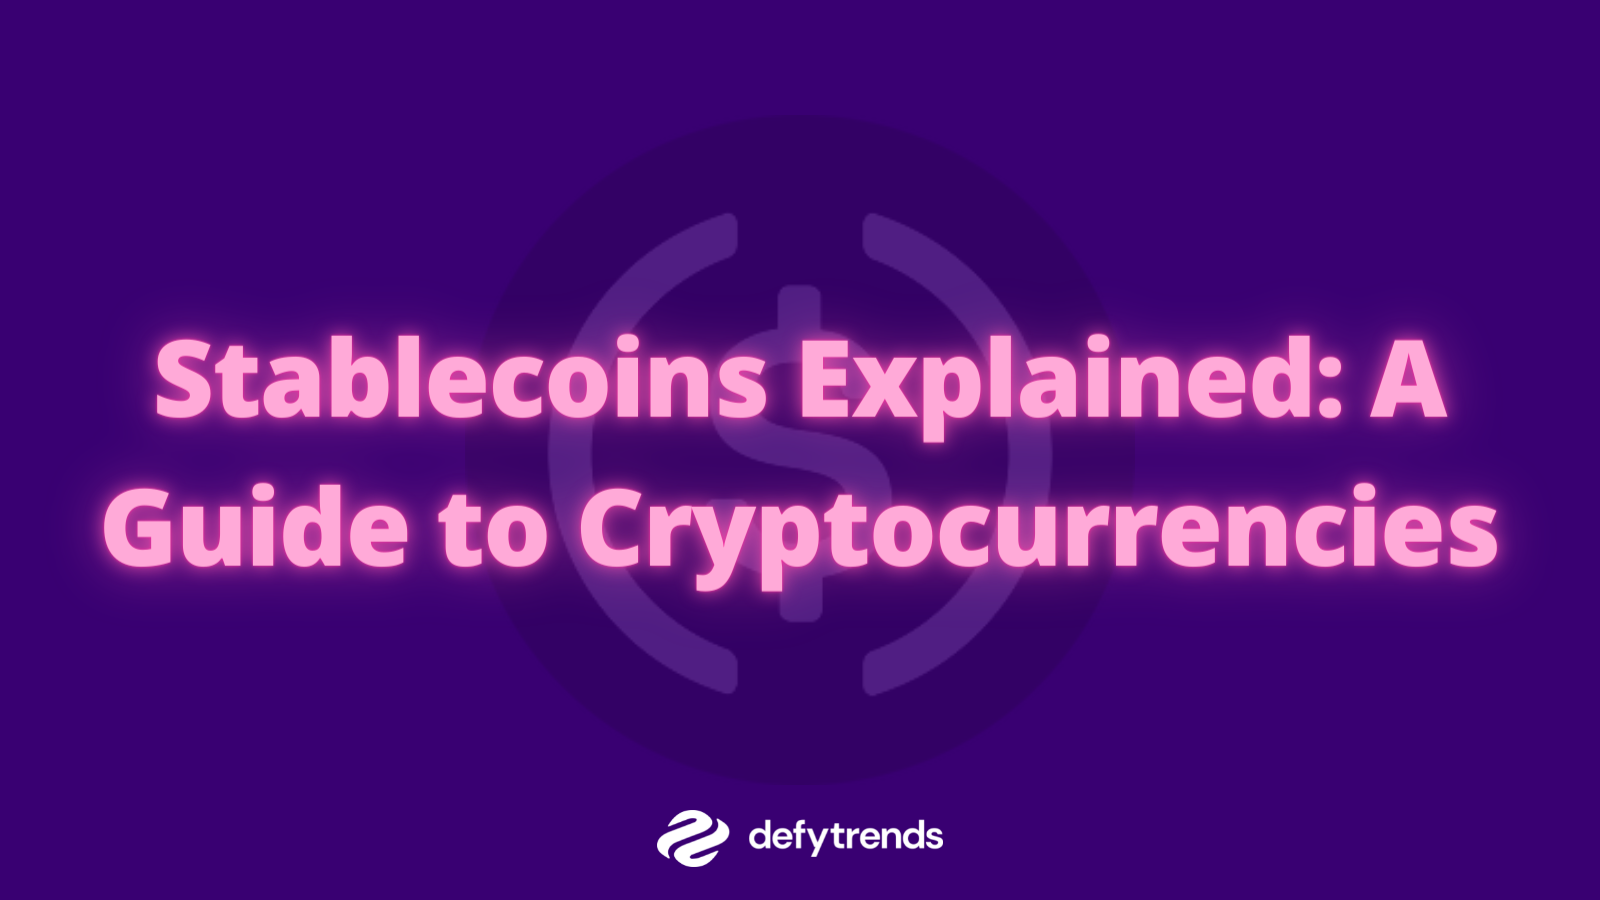 Stablecoins Explained: A Guide to Cryptocurrencies